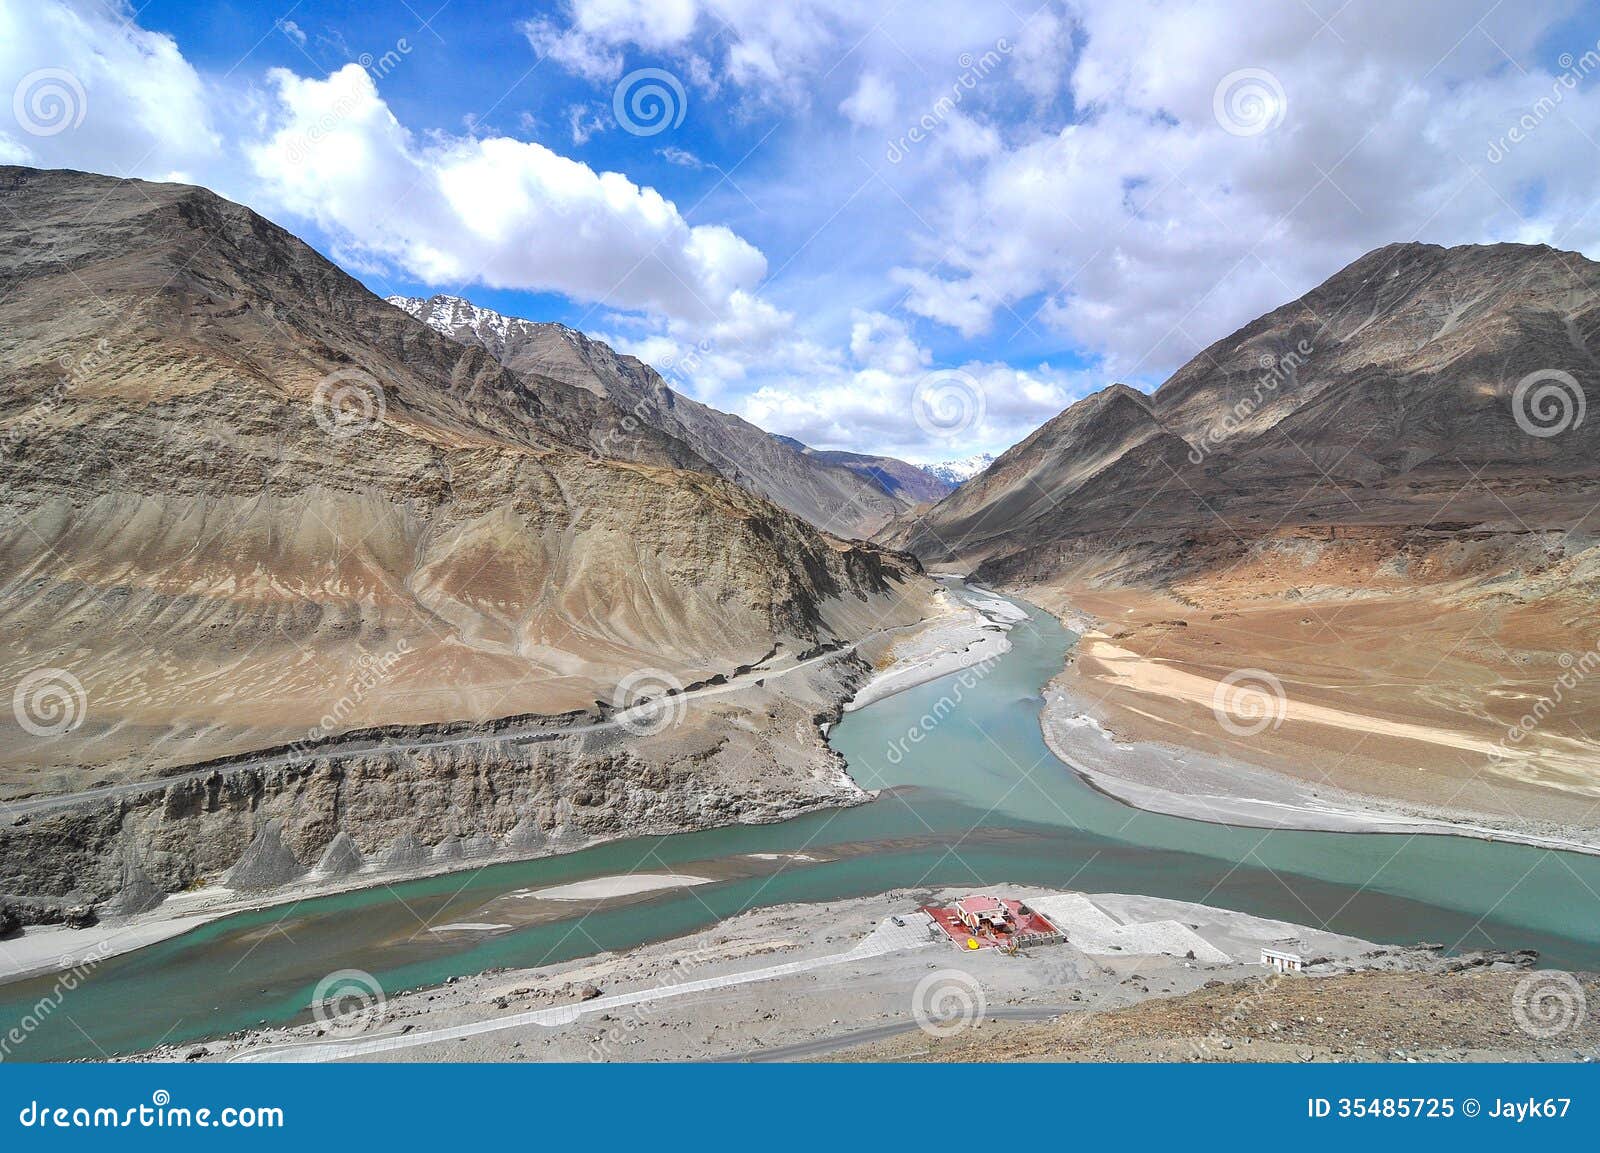 confluence of rivers indus and zanskar